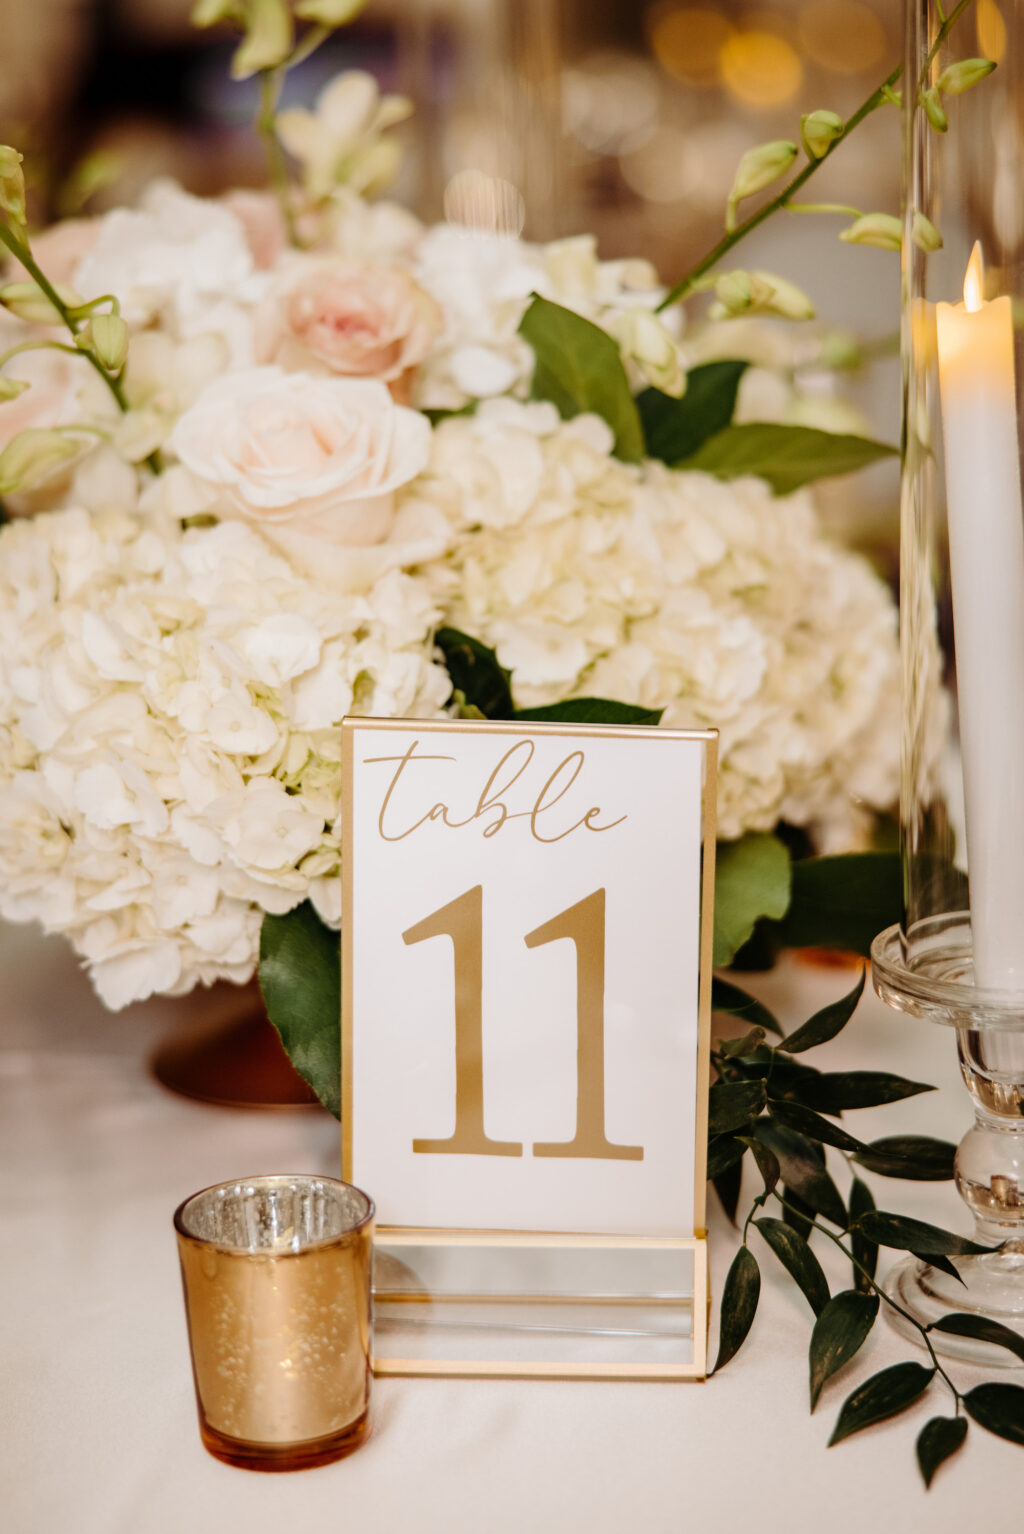 Gold Framed Table Numbers | White Hydrangea and Rose Centerpieces Inspiration | Gold Votive Candles